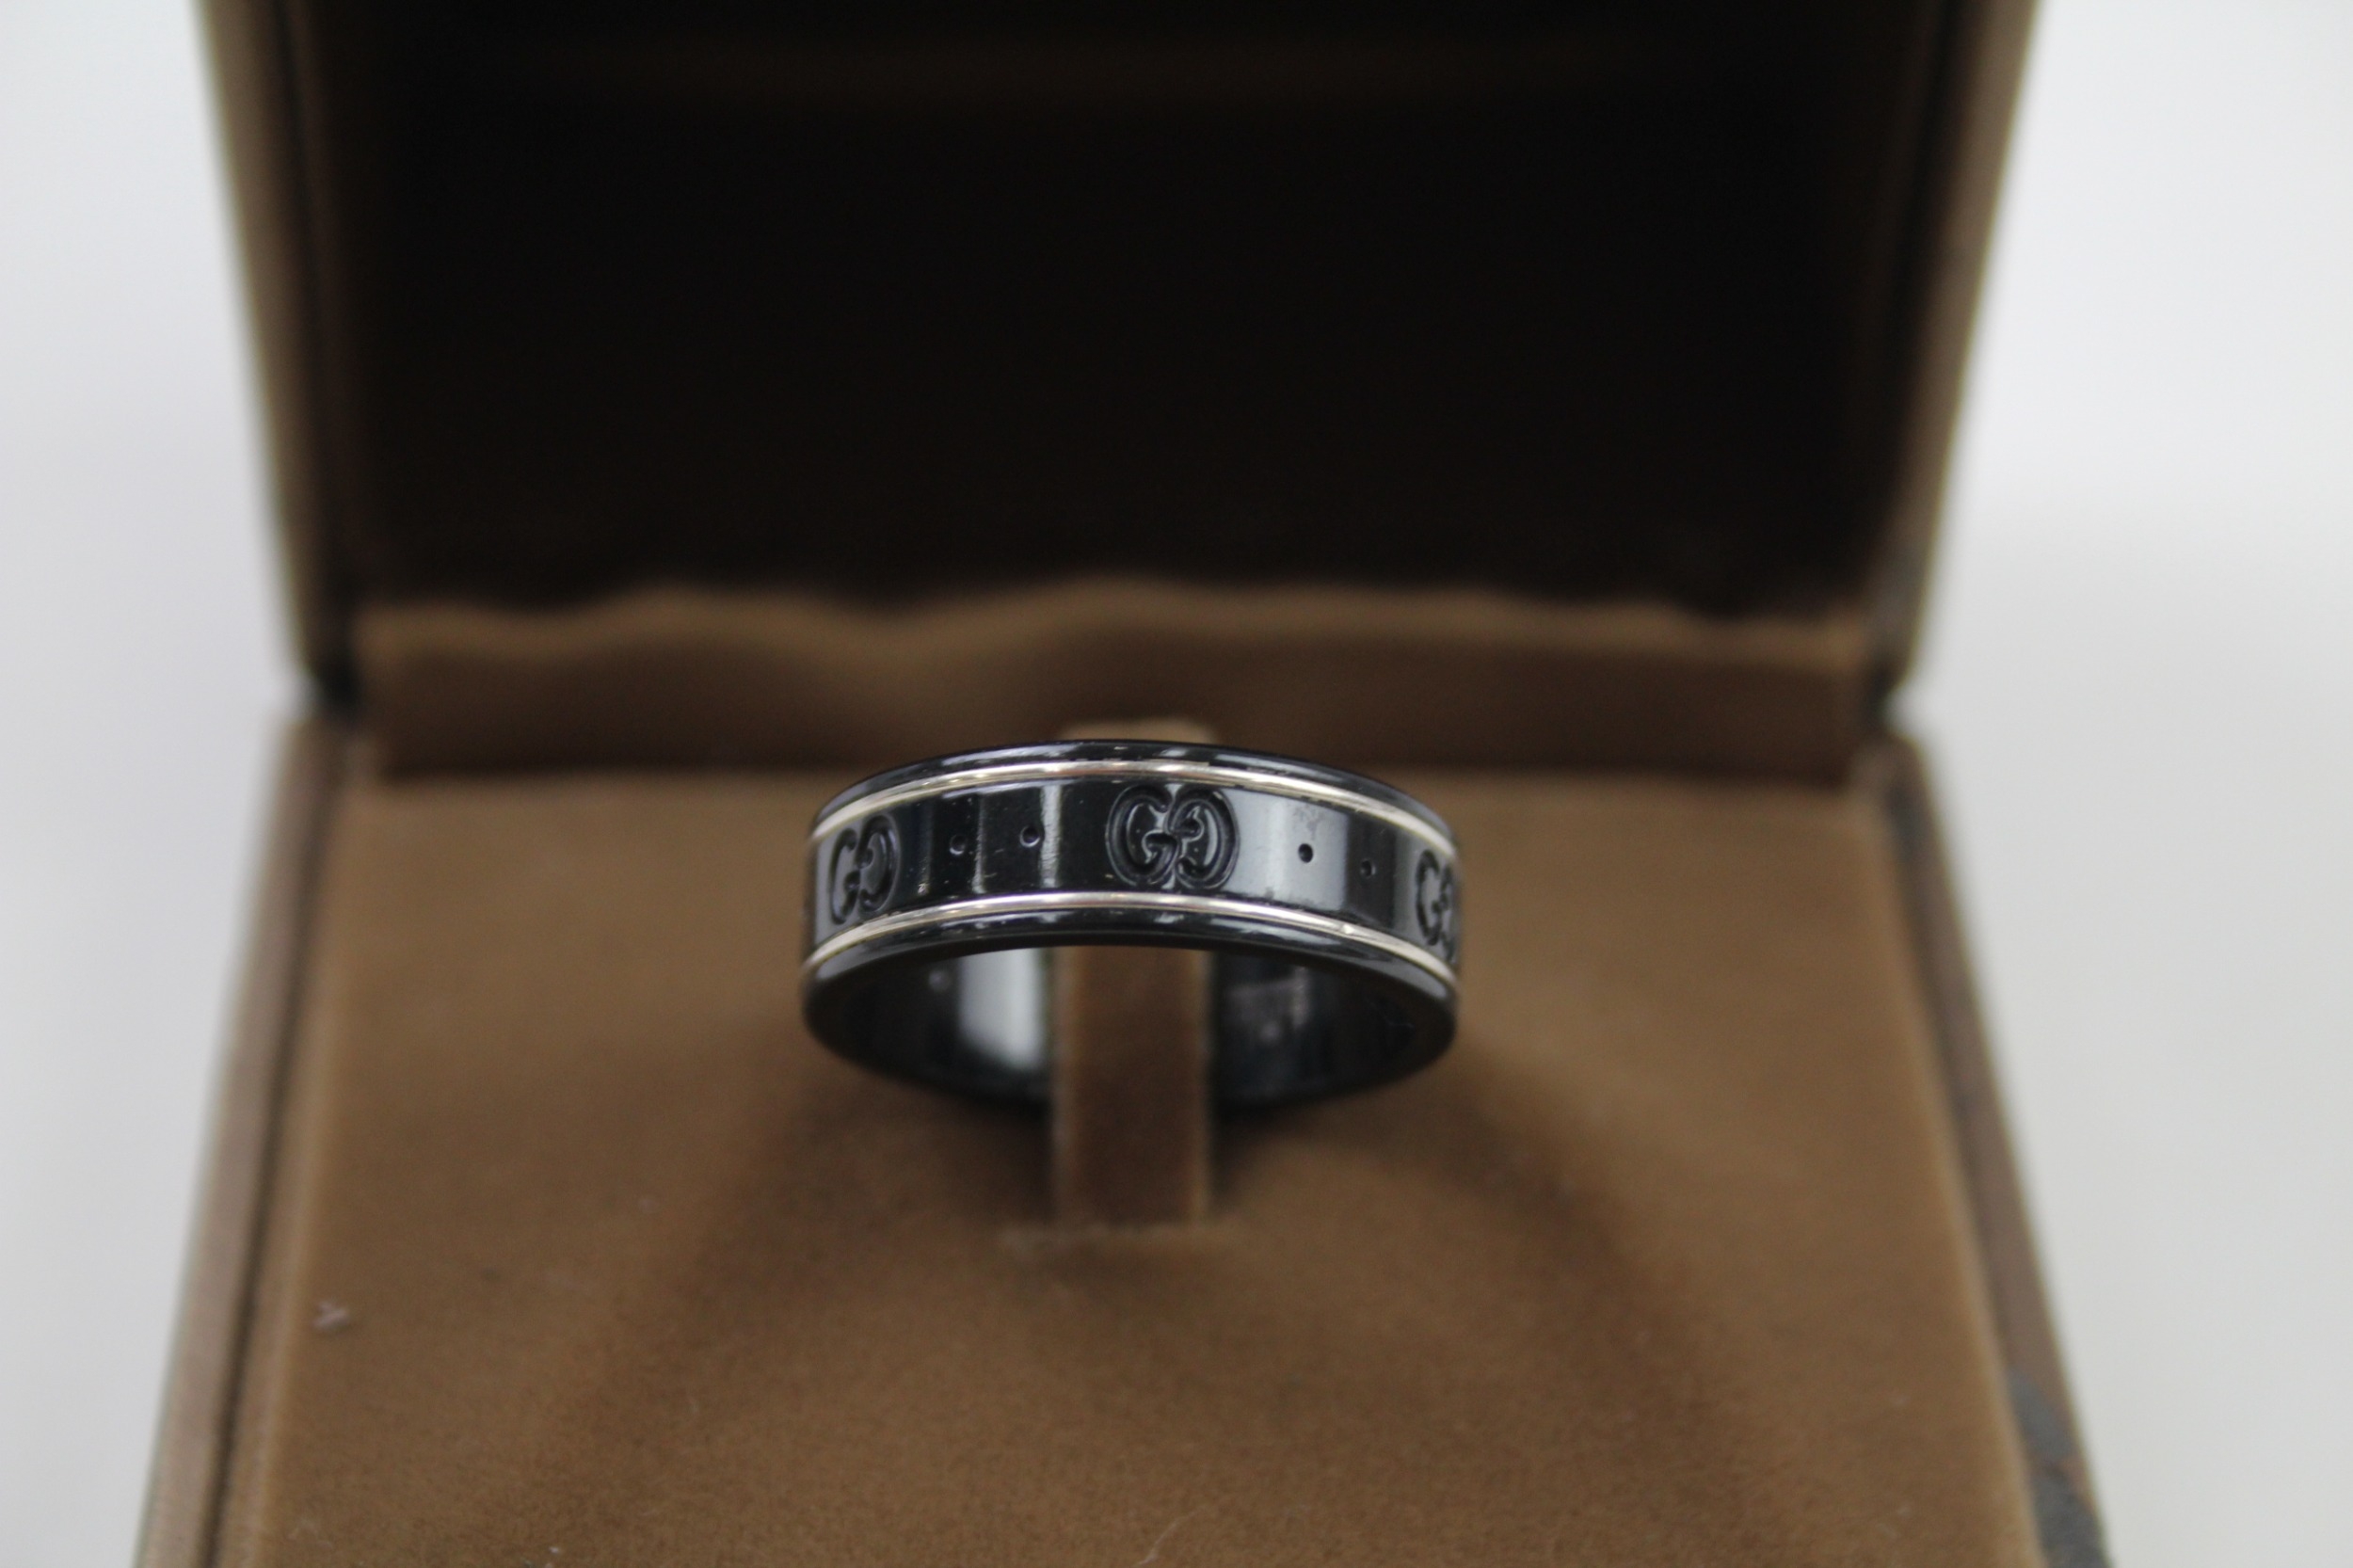 Black band ring by designer Gucci with box (3g) - Image 2 of 8